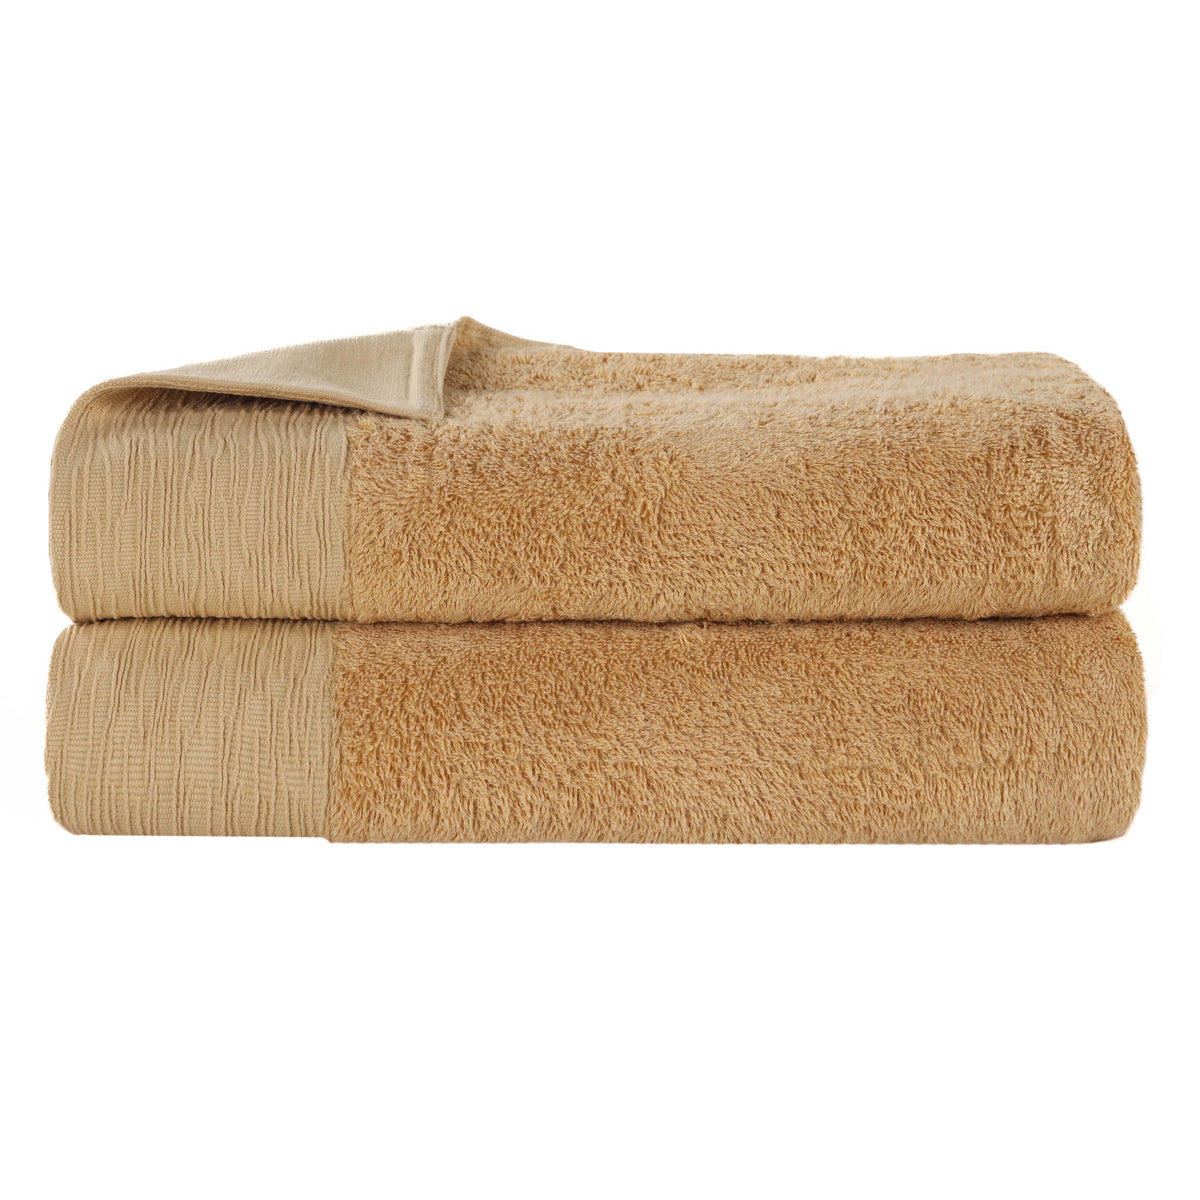 Rayon from Bamboo Eco-Friendly Fluffy Soft Solid Bath Sheet - Gold